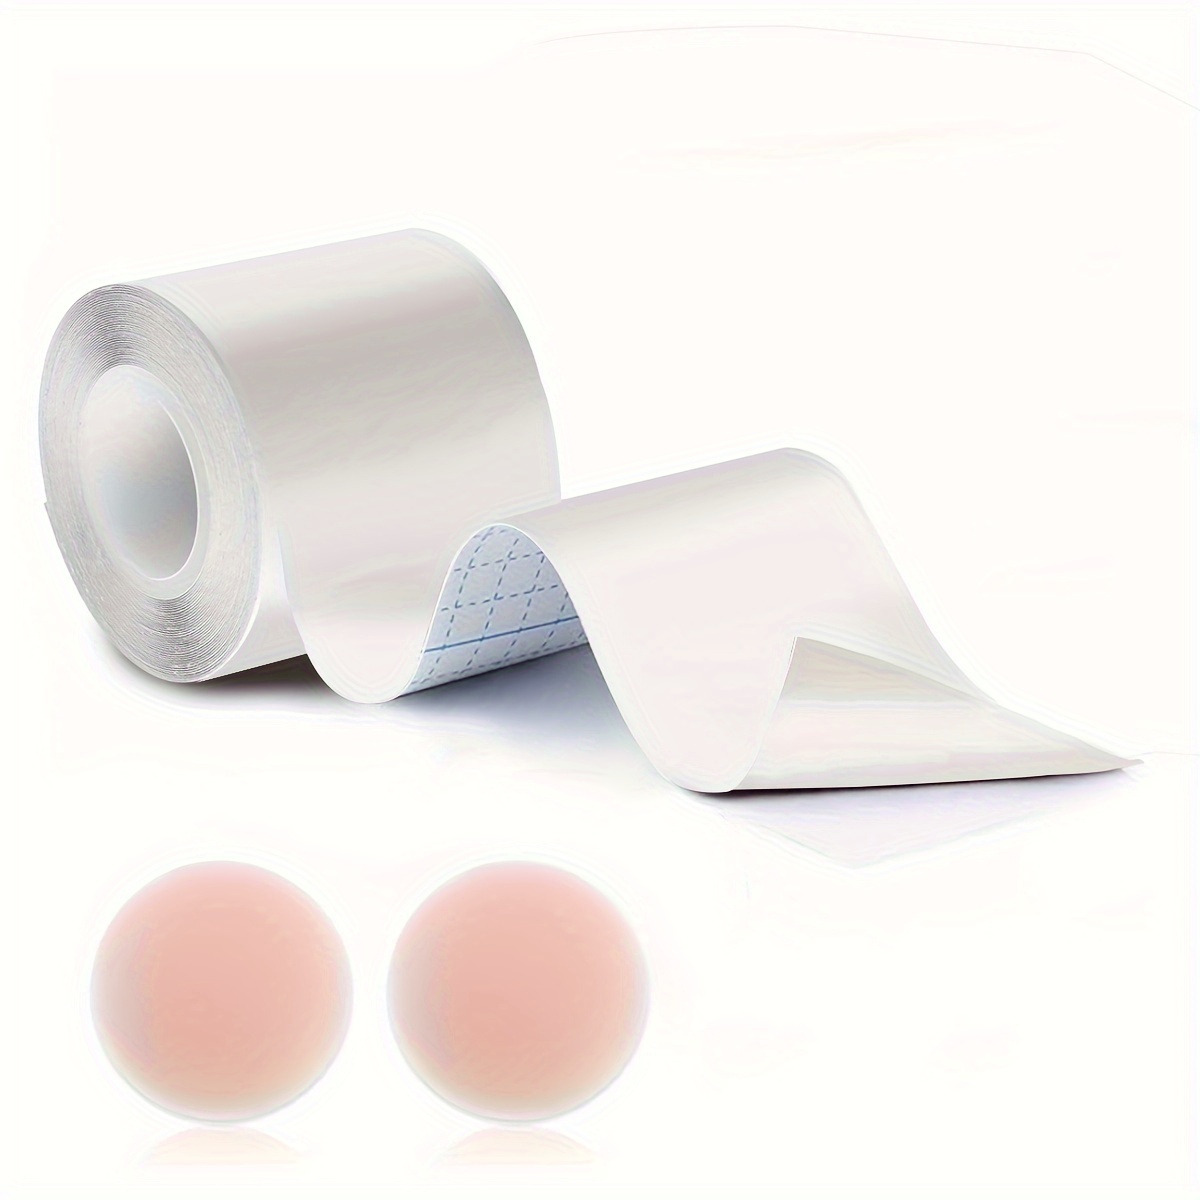 Boob Tape for Breast Lift, Body Tape for Breast Lift with Silicone